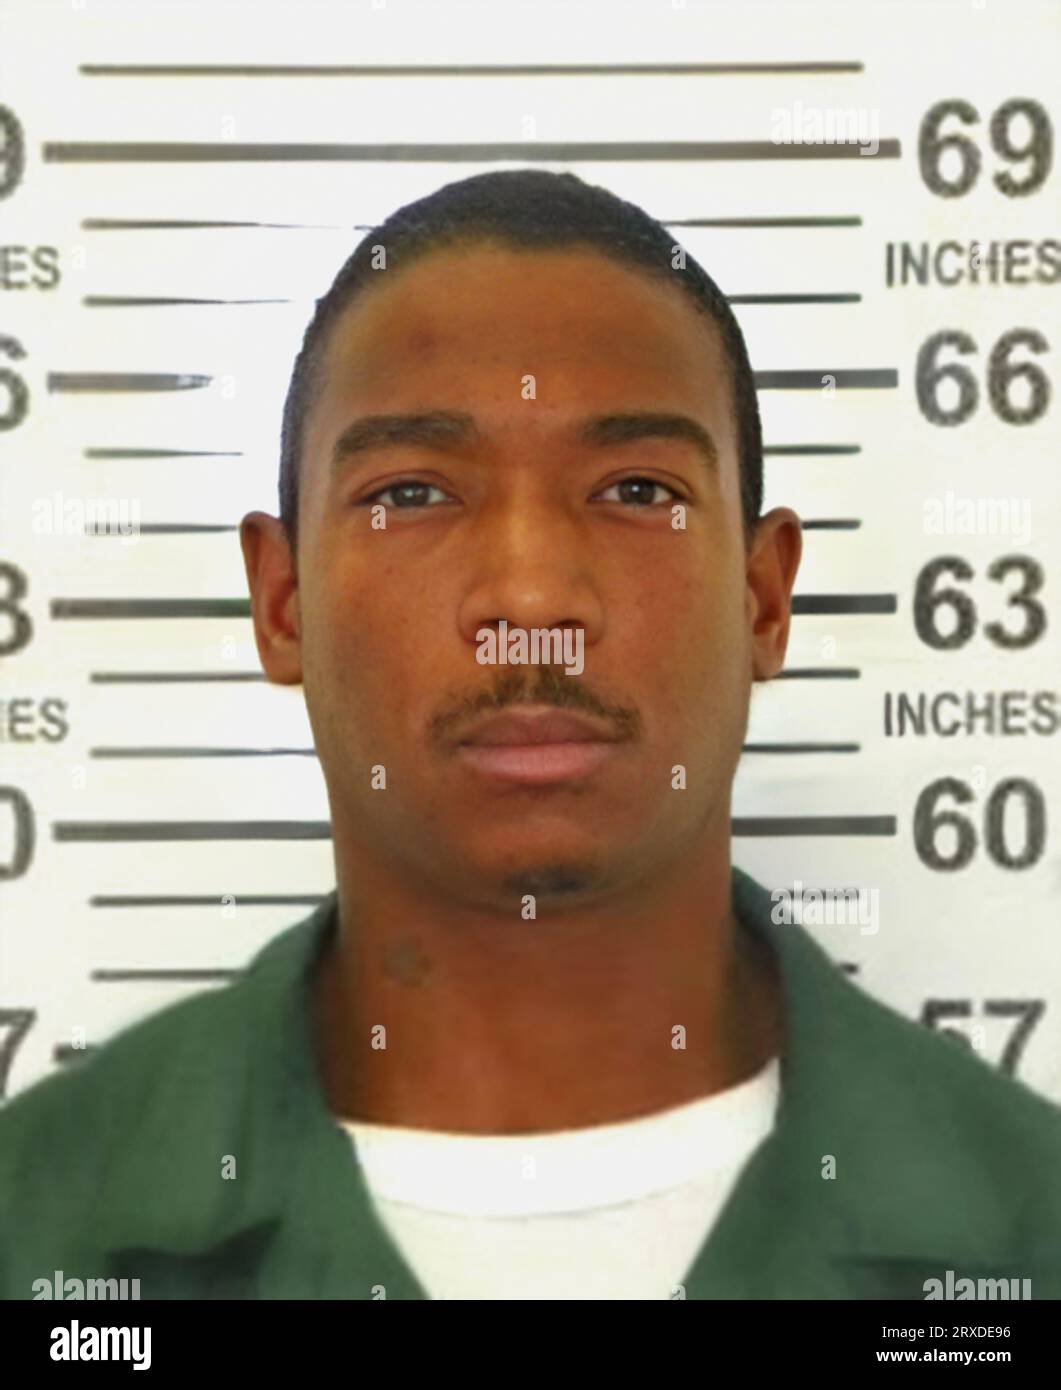 2011, july , NEW YORK , USA : The american Hip Hop Rapper singer and composer JA RULE ( born Jeffrey Atkins , 29 february 1976 ) when was arrested , in the official mug shot by New York State Department of Correctional Services  . Ja Rule  was arrested following separate convictions for gun possession and failure to pay federal income taxes . Sentenced to more than two years behind bars, was incarcerated at the Oneida Correctional Facility in upstate New York . Unknown photographer. -  HISTORY - FOTO STORICHE  - MUGSHOT - MUG-SHOT - MUSIC - MUSICA - cantante - COMPOSITORE - composer - ARRESTO Stock Photo